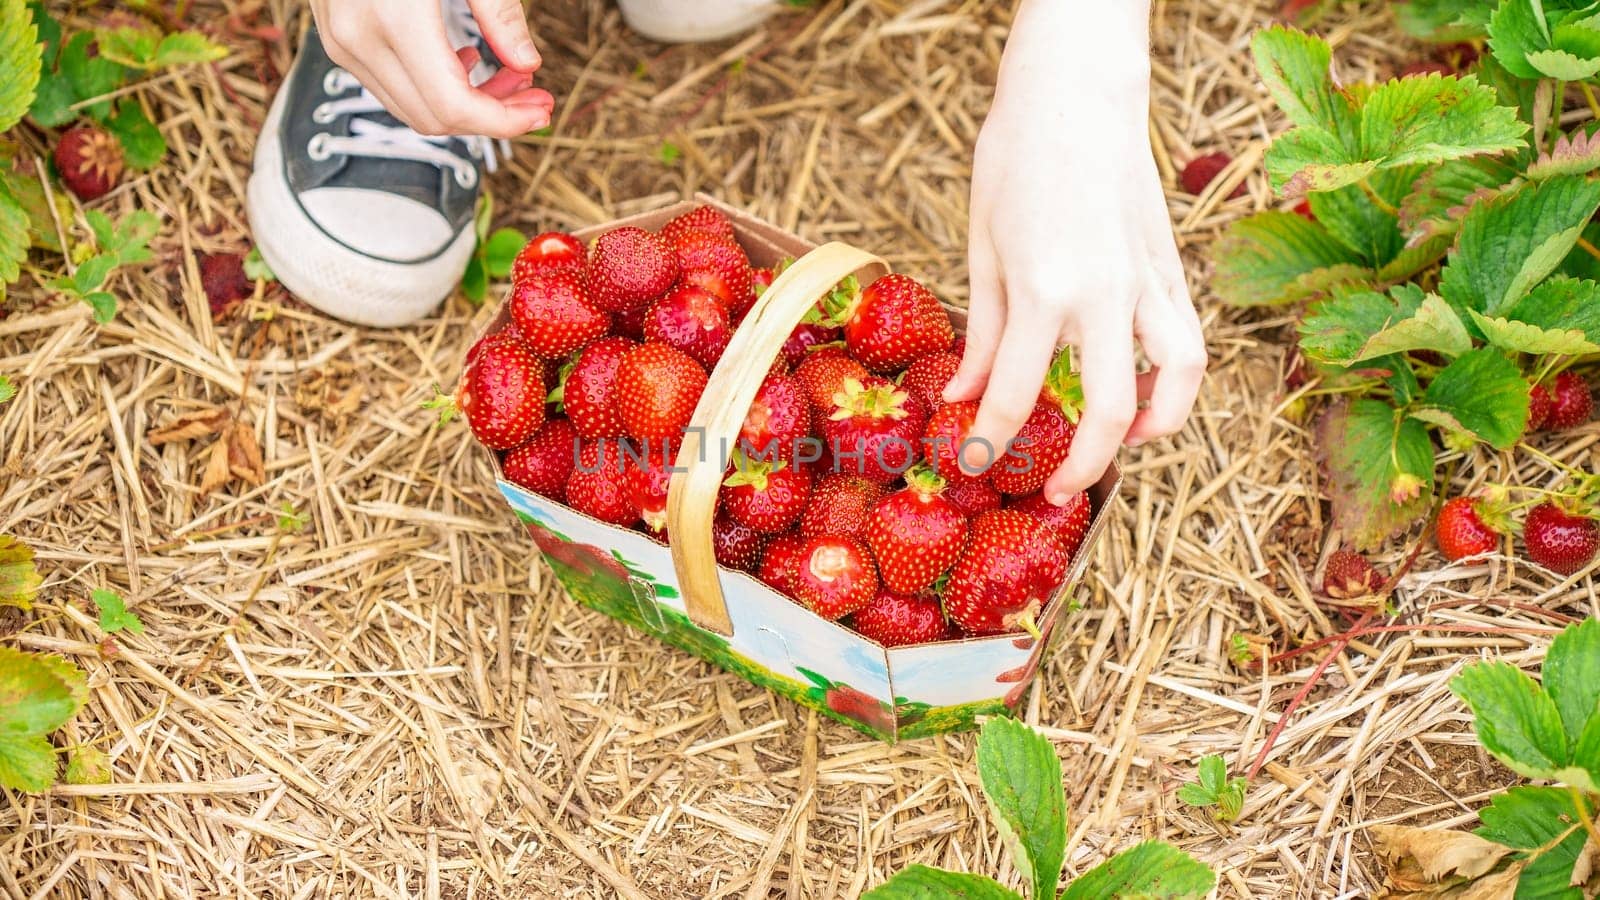 Full basket with fresh red strawberries after harvest on ground next to black shoes on organic strawberry farm. Strawberries ready for export. Agriculture and ecological fruit farming concept.